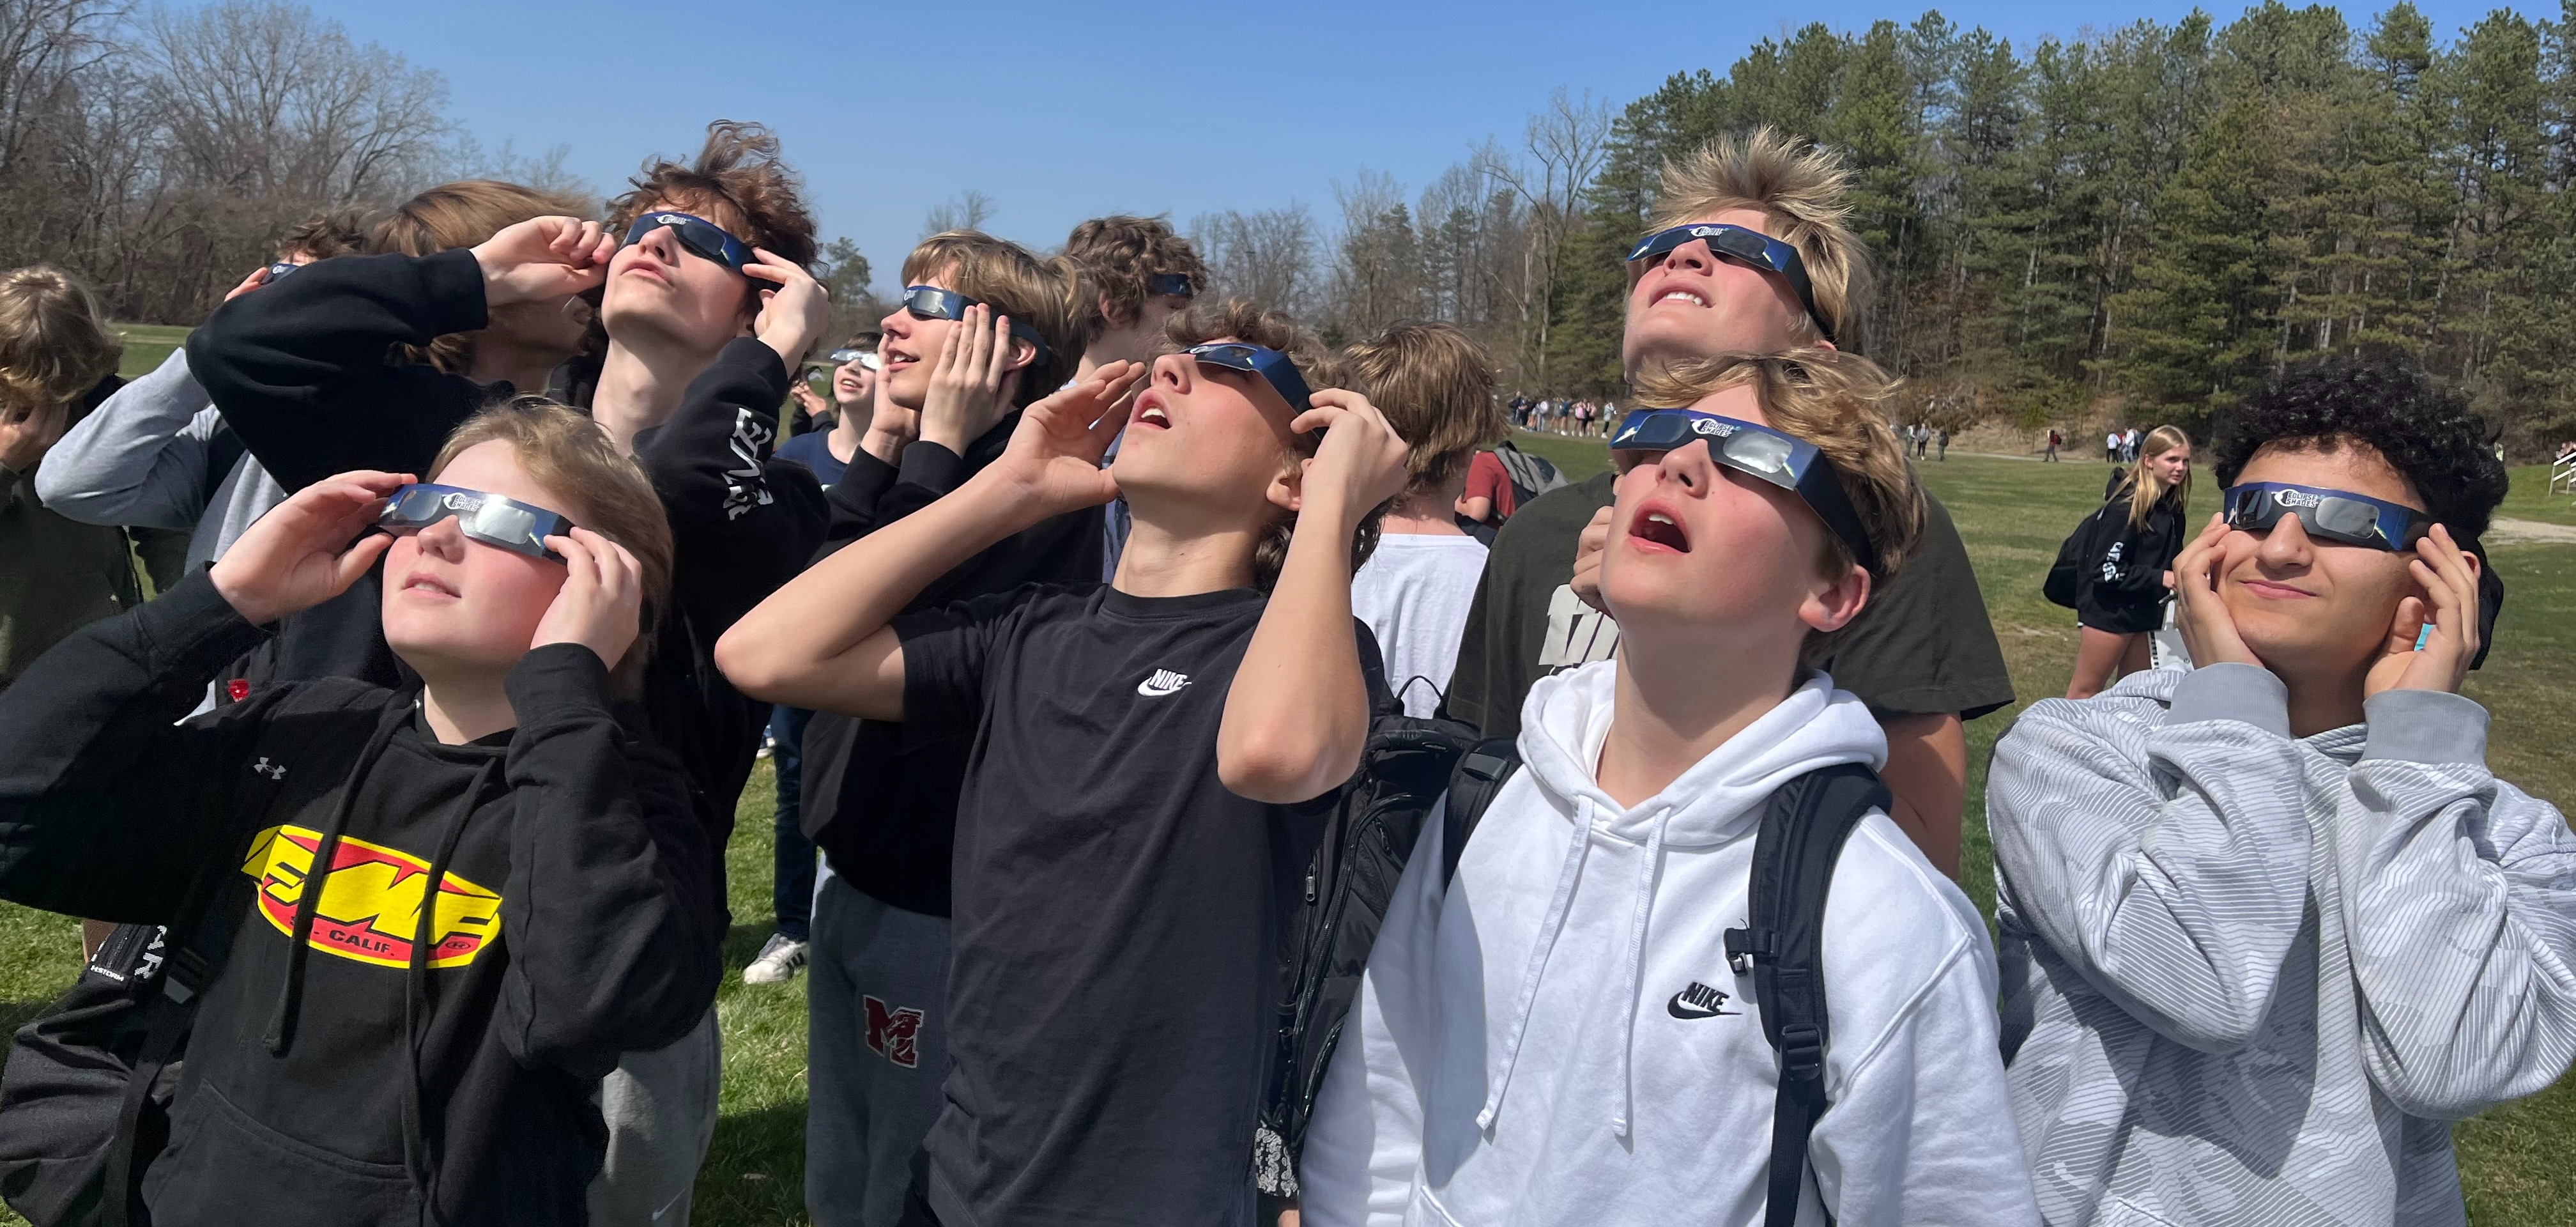 Students enjoying the eclipse with sun protection